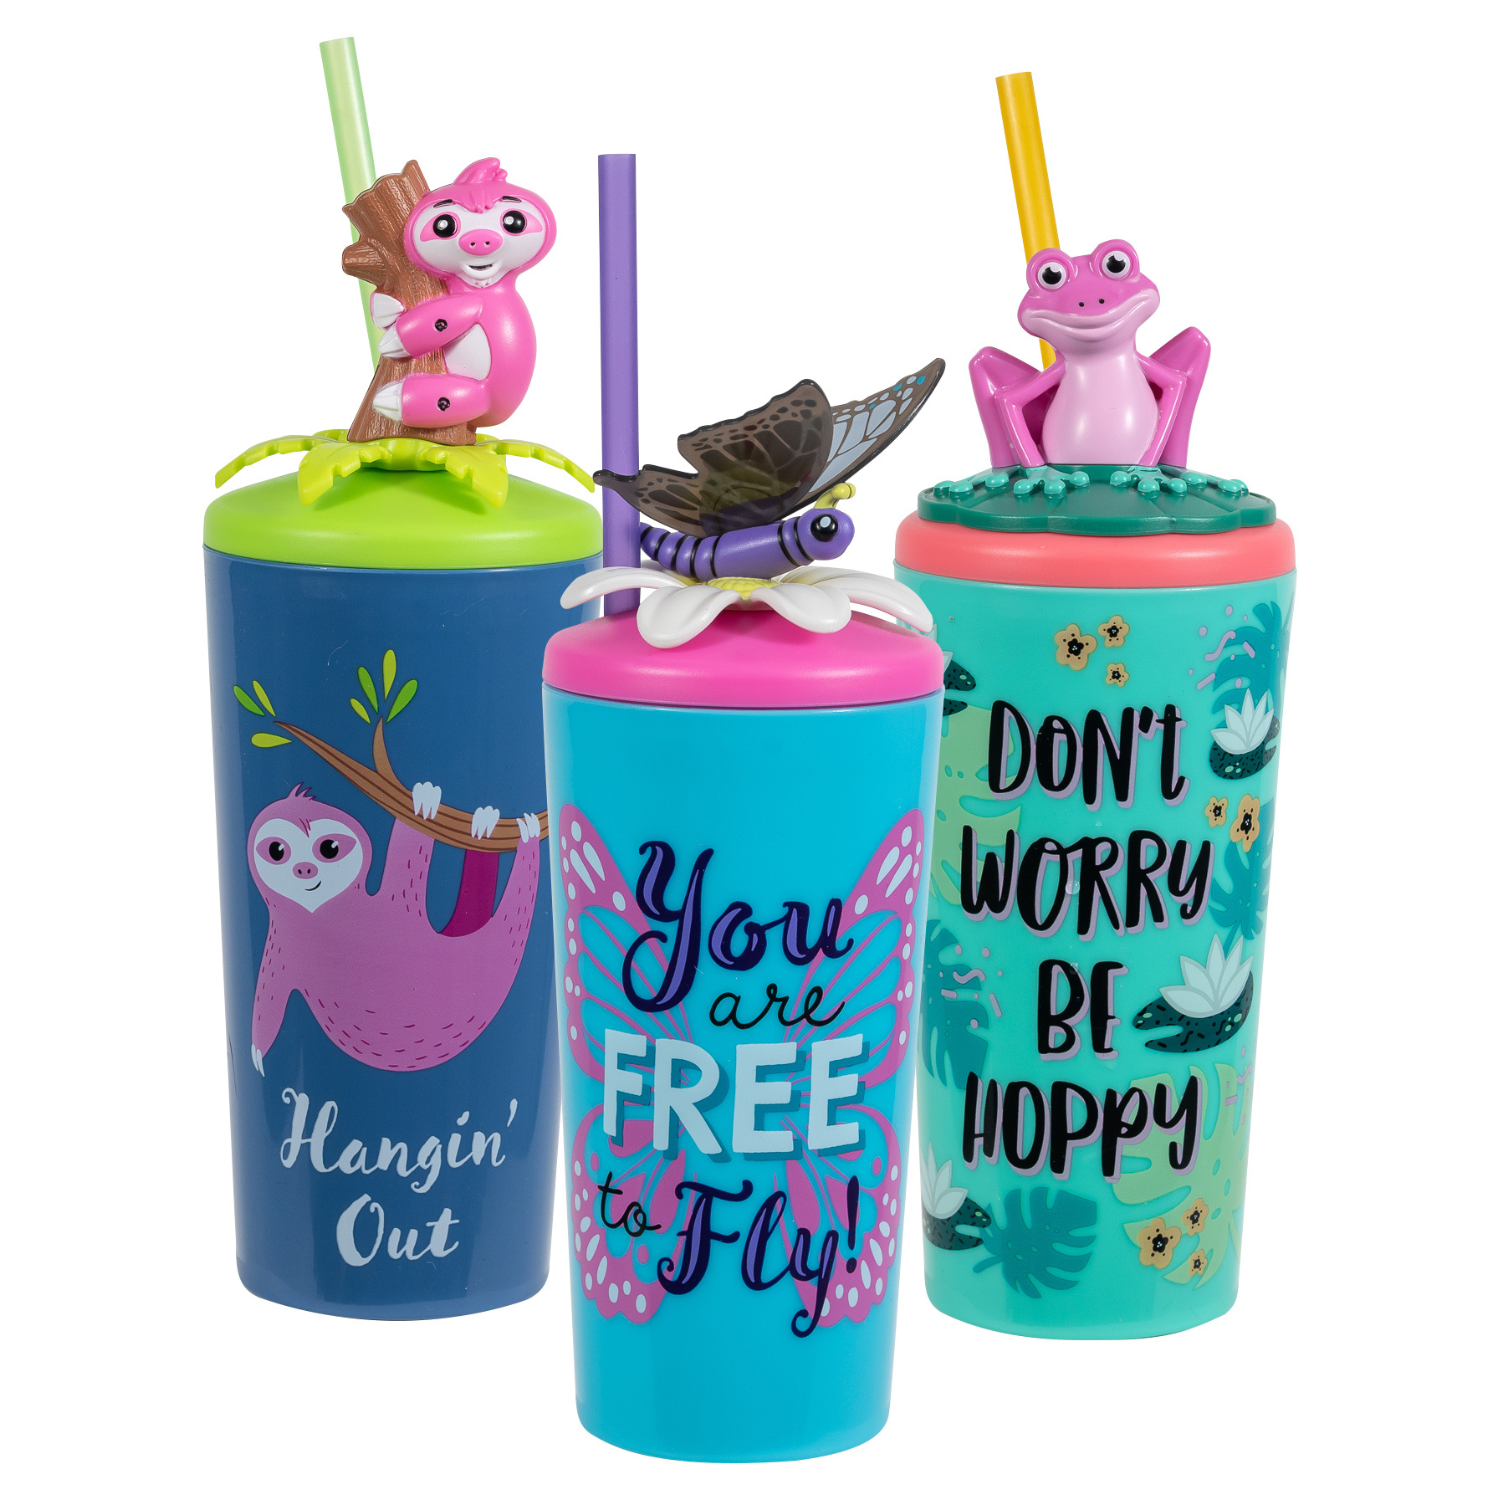 Cool Gear Fun Model Threaded Character Lid Tumblers Toppers with straw included, 18 Ounce - image 1 of 2